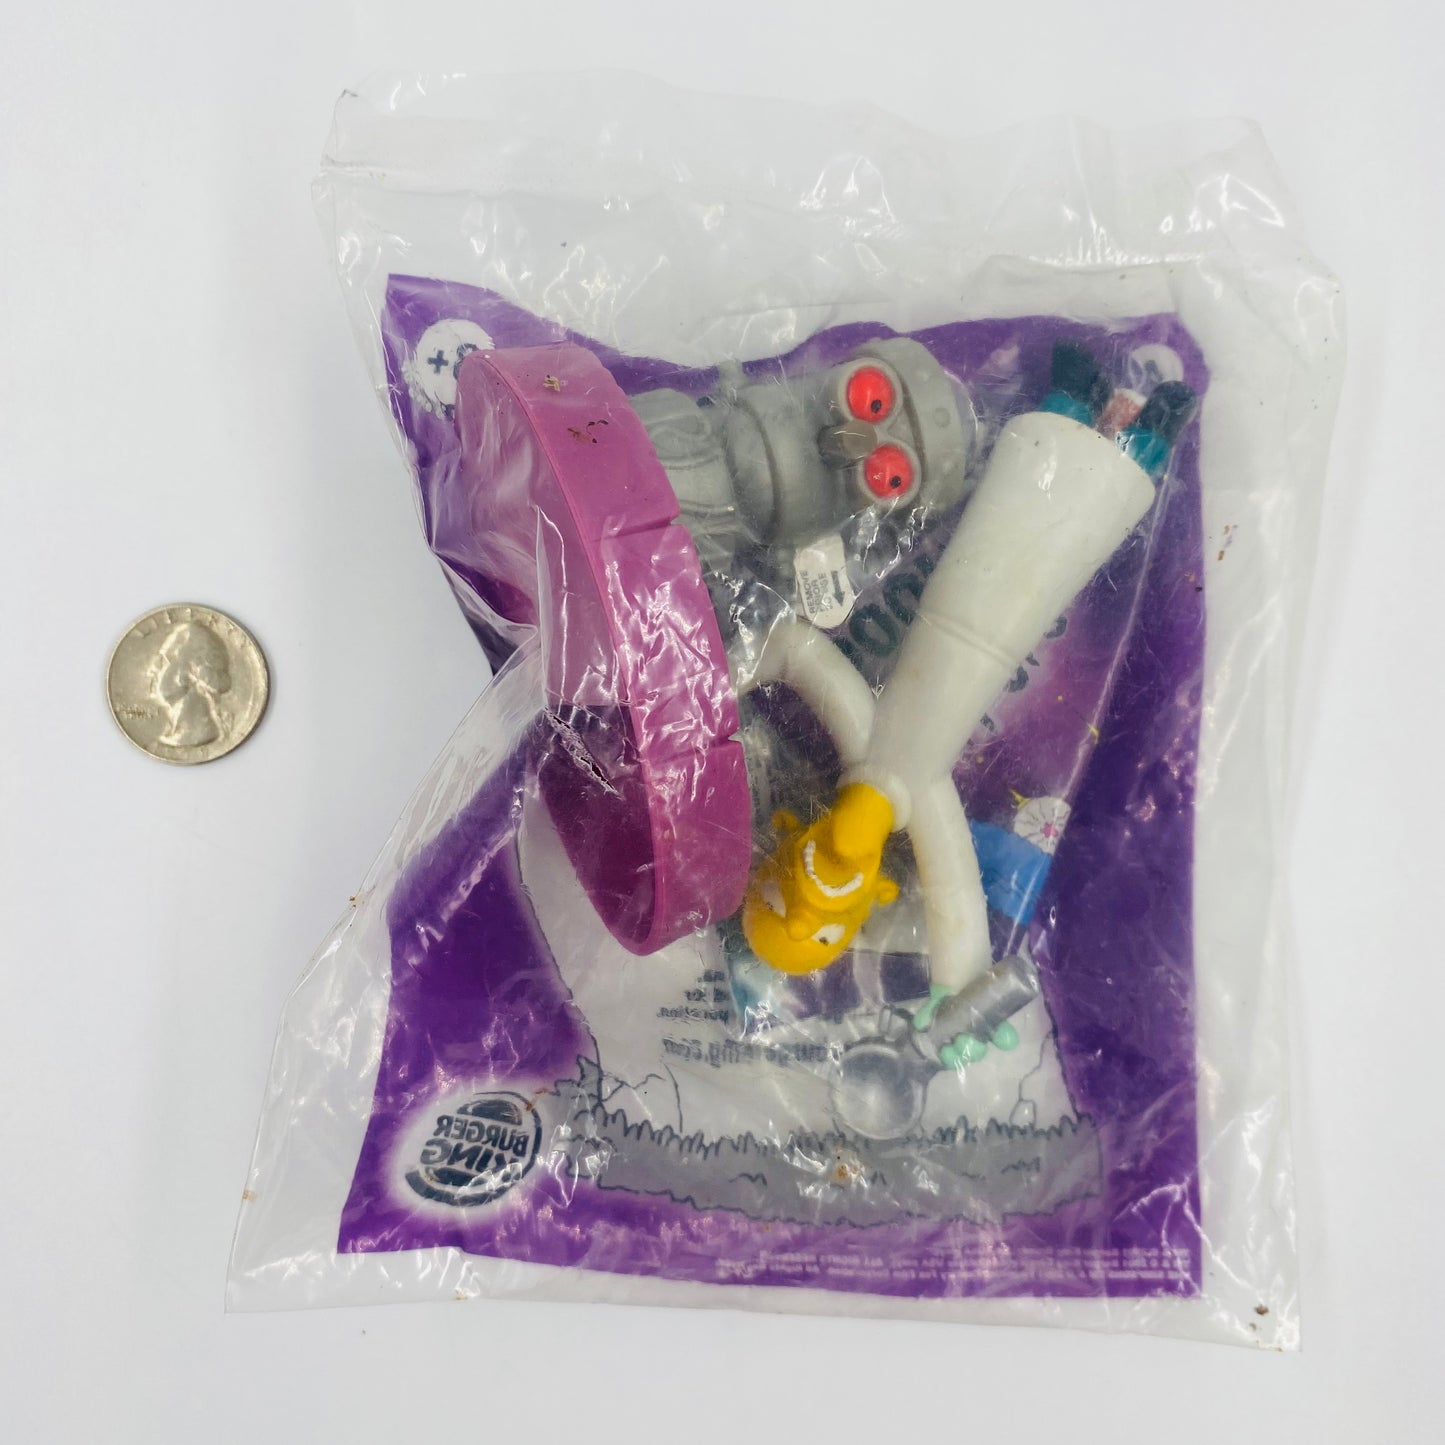 The Simpsons Spooky Light-Ups Mr. Burns Burger King Kids' Meals toy (2001) bagged